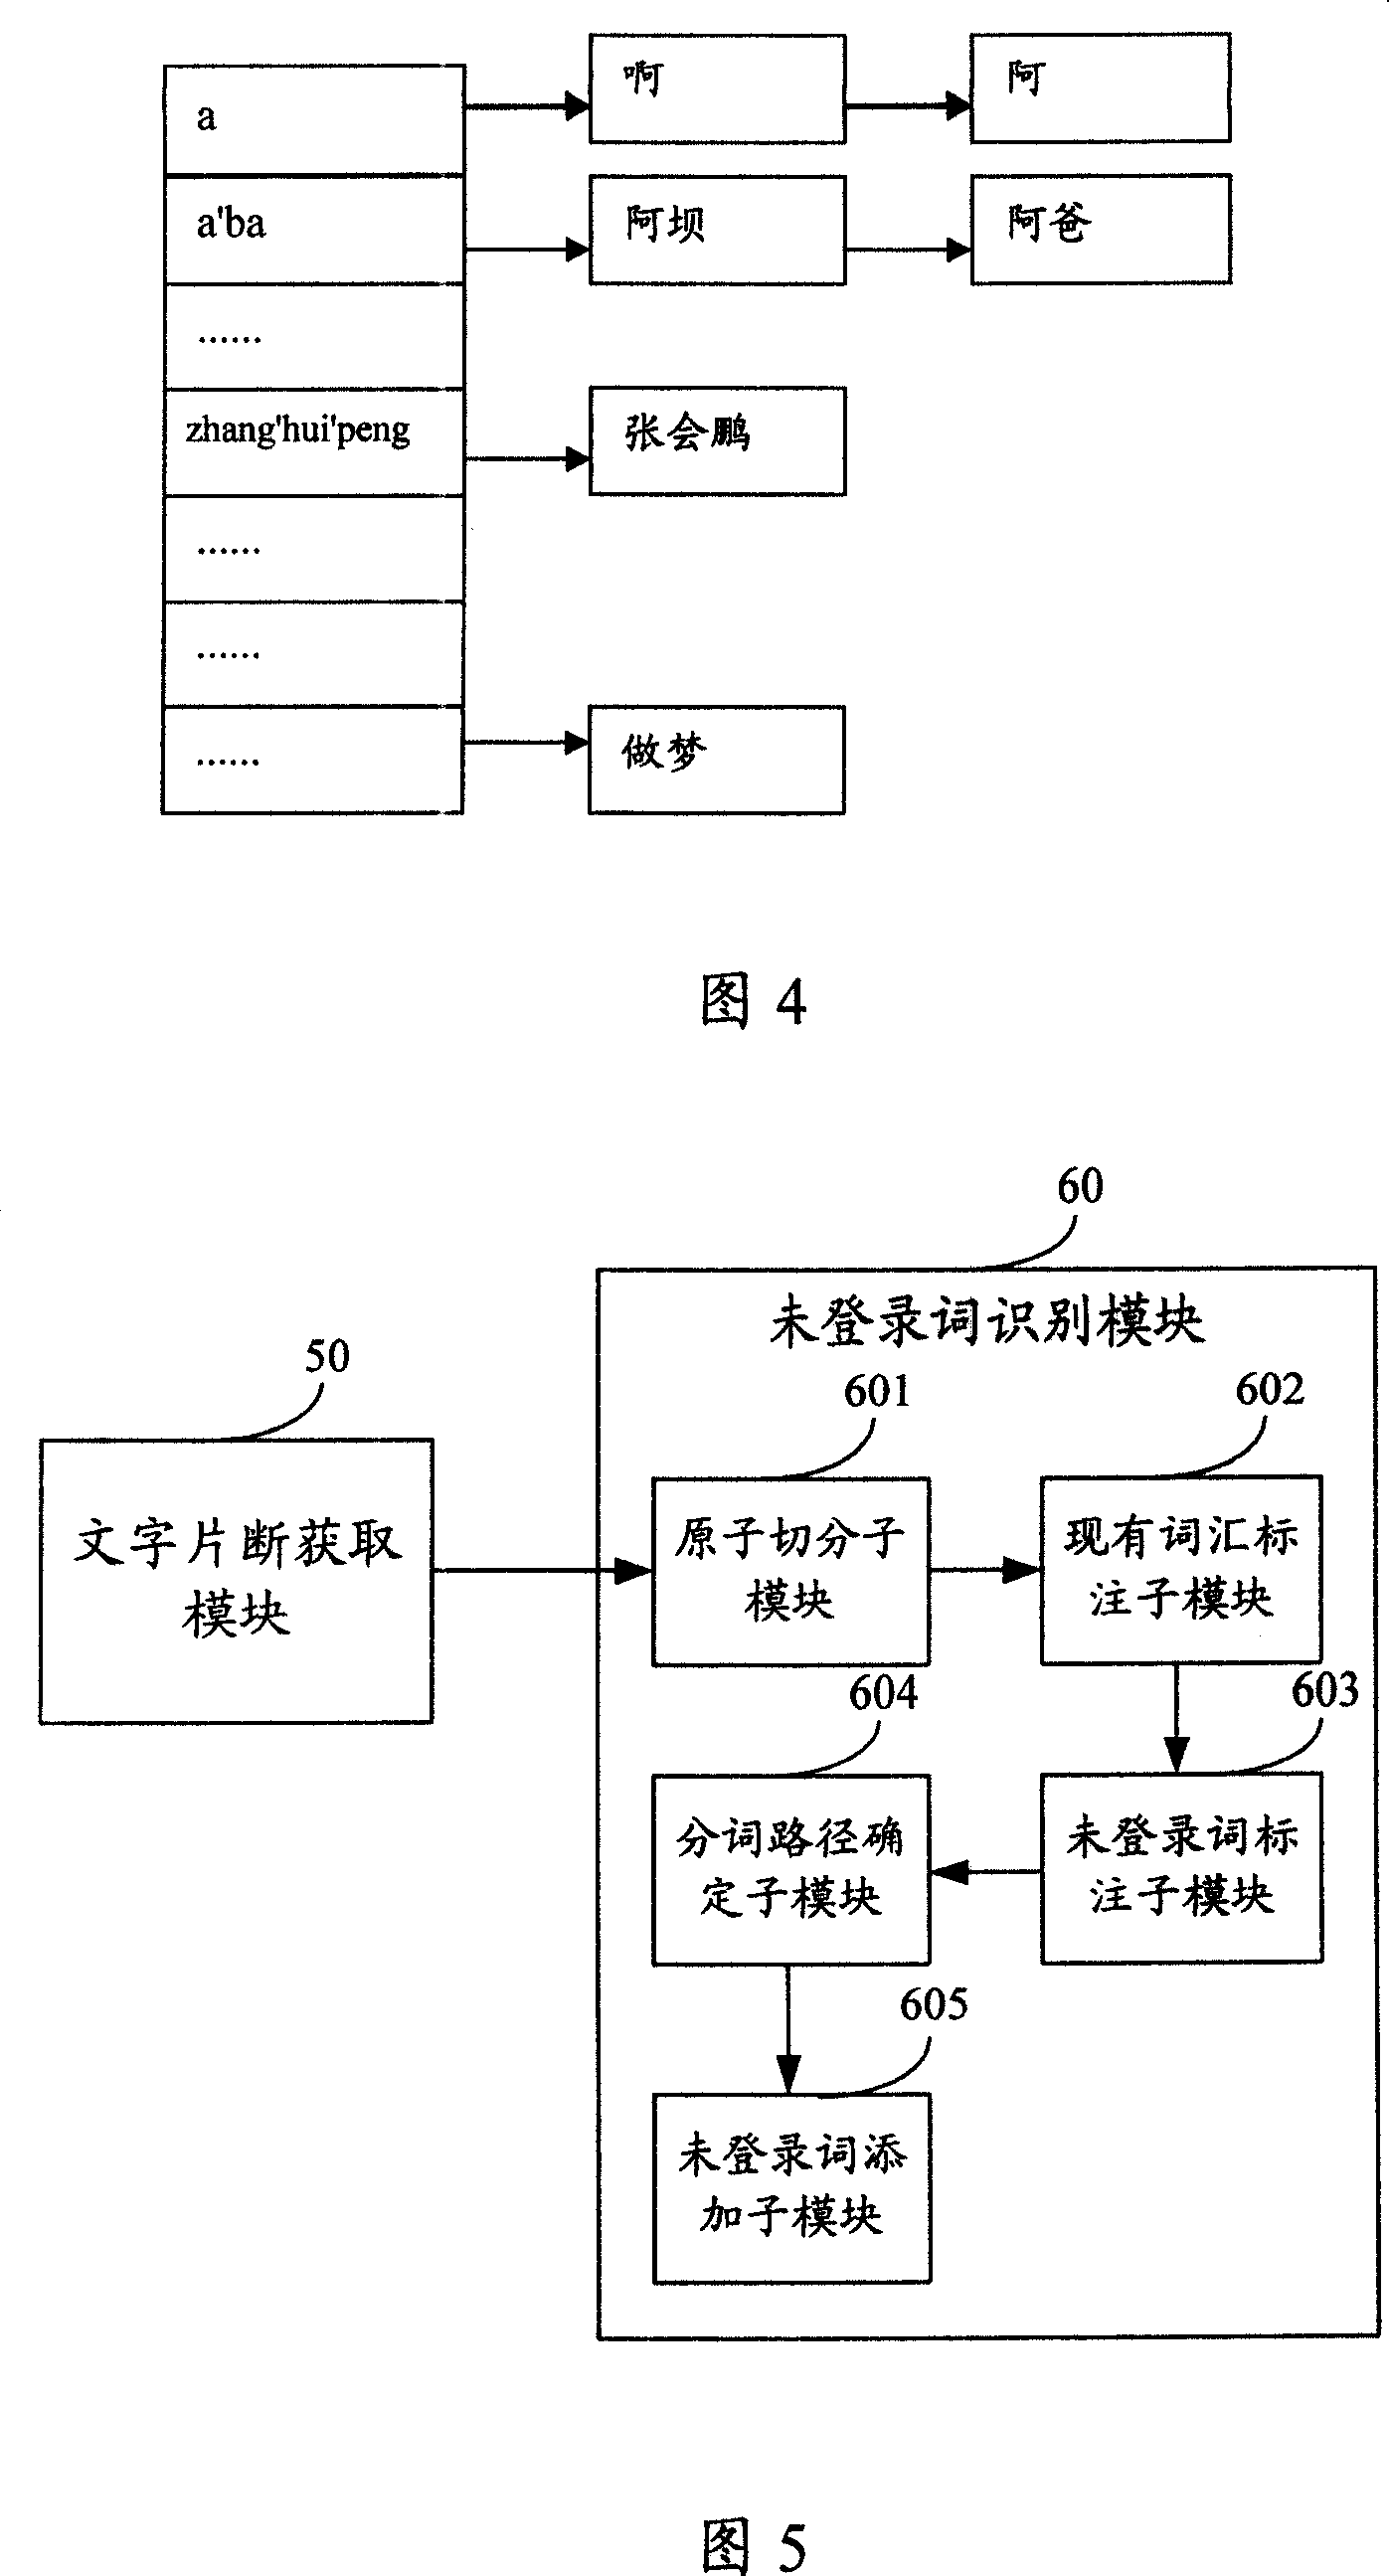 Method for adding unlisted word to word stock of input method and its character input device